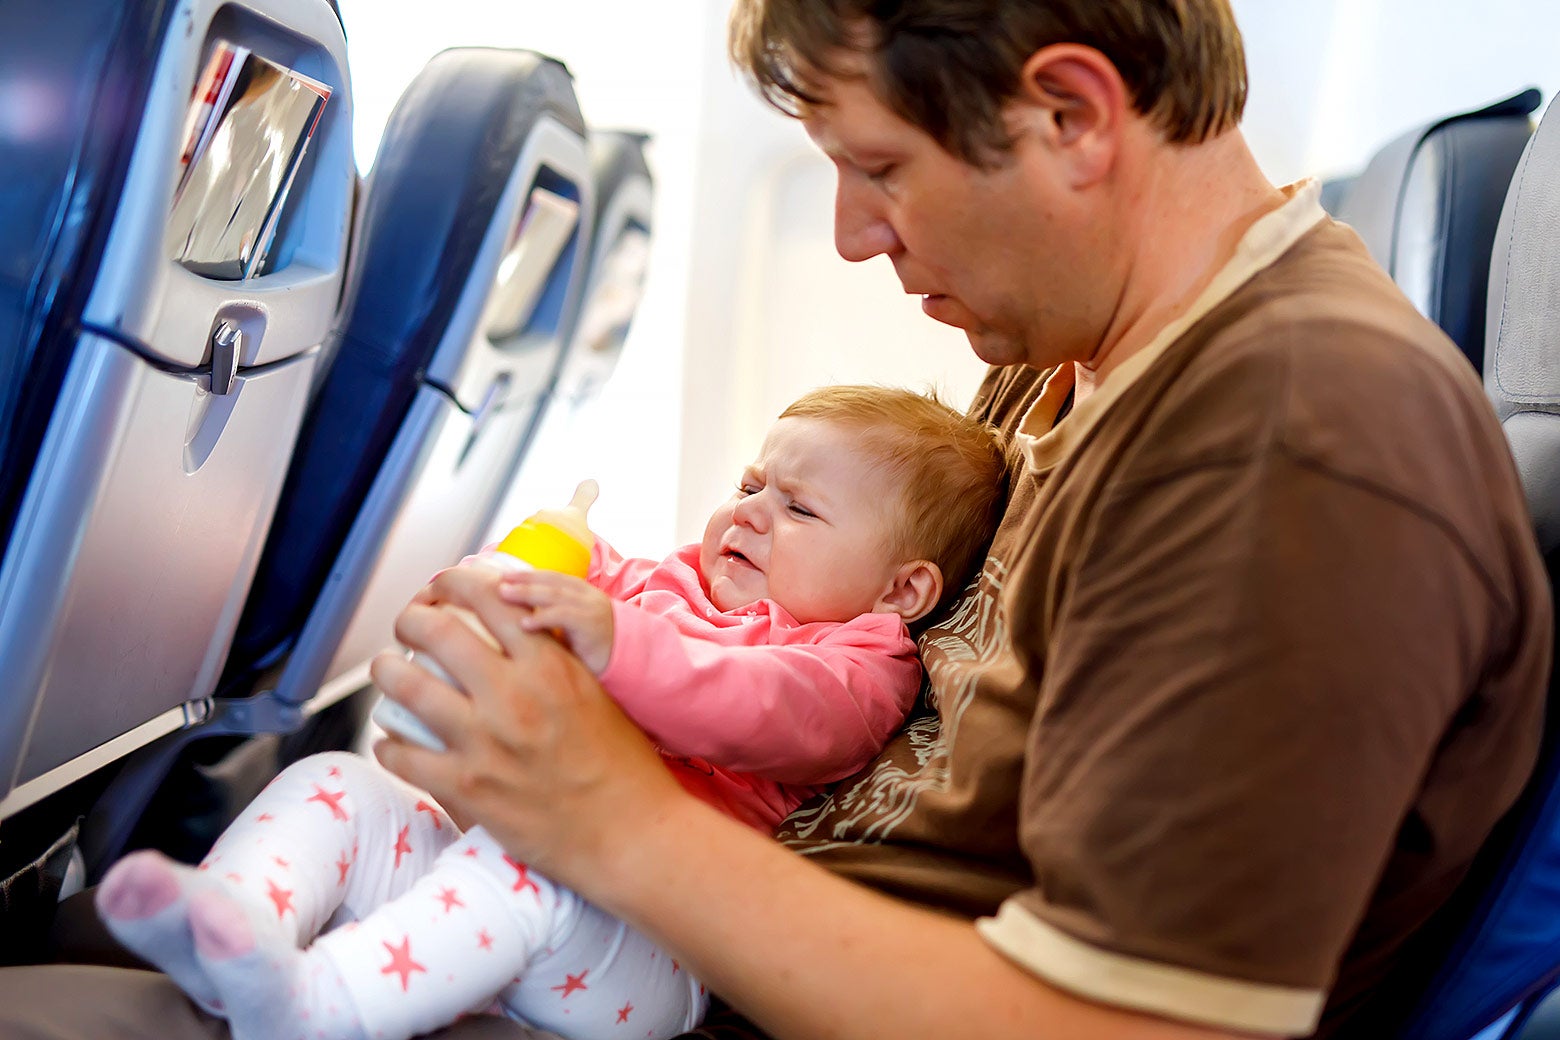 A baby fusses in an airplane seat with his miserable father.